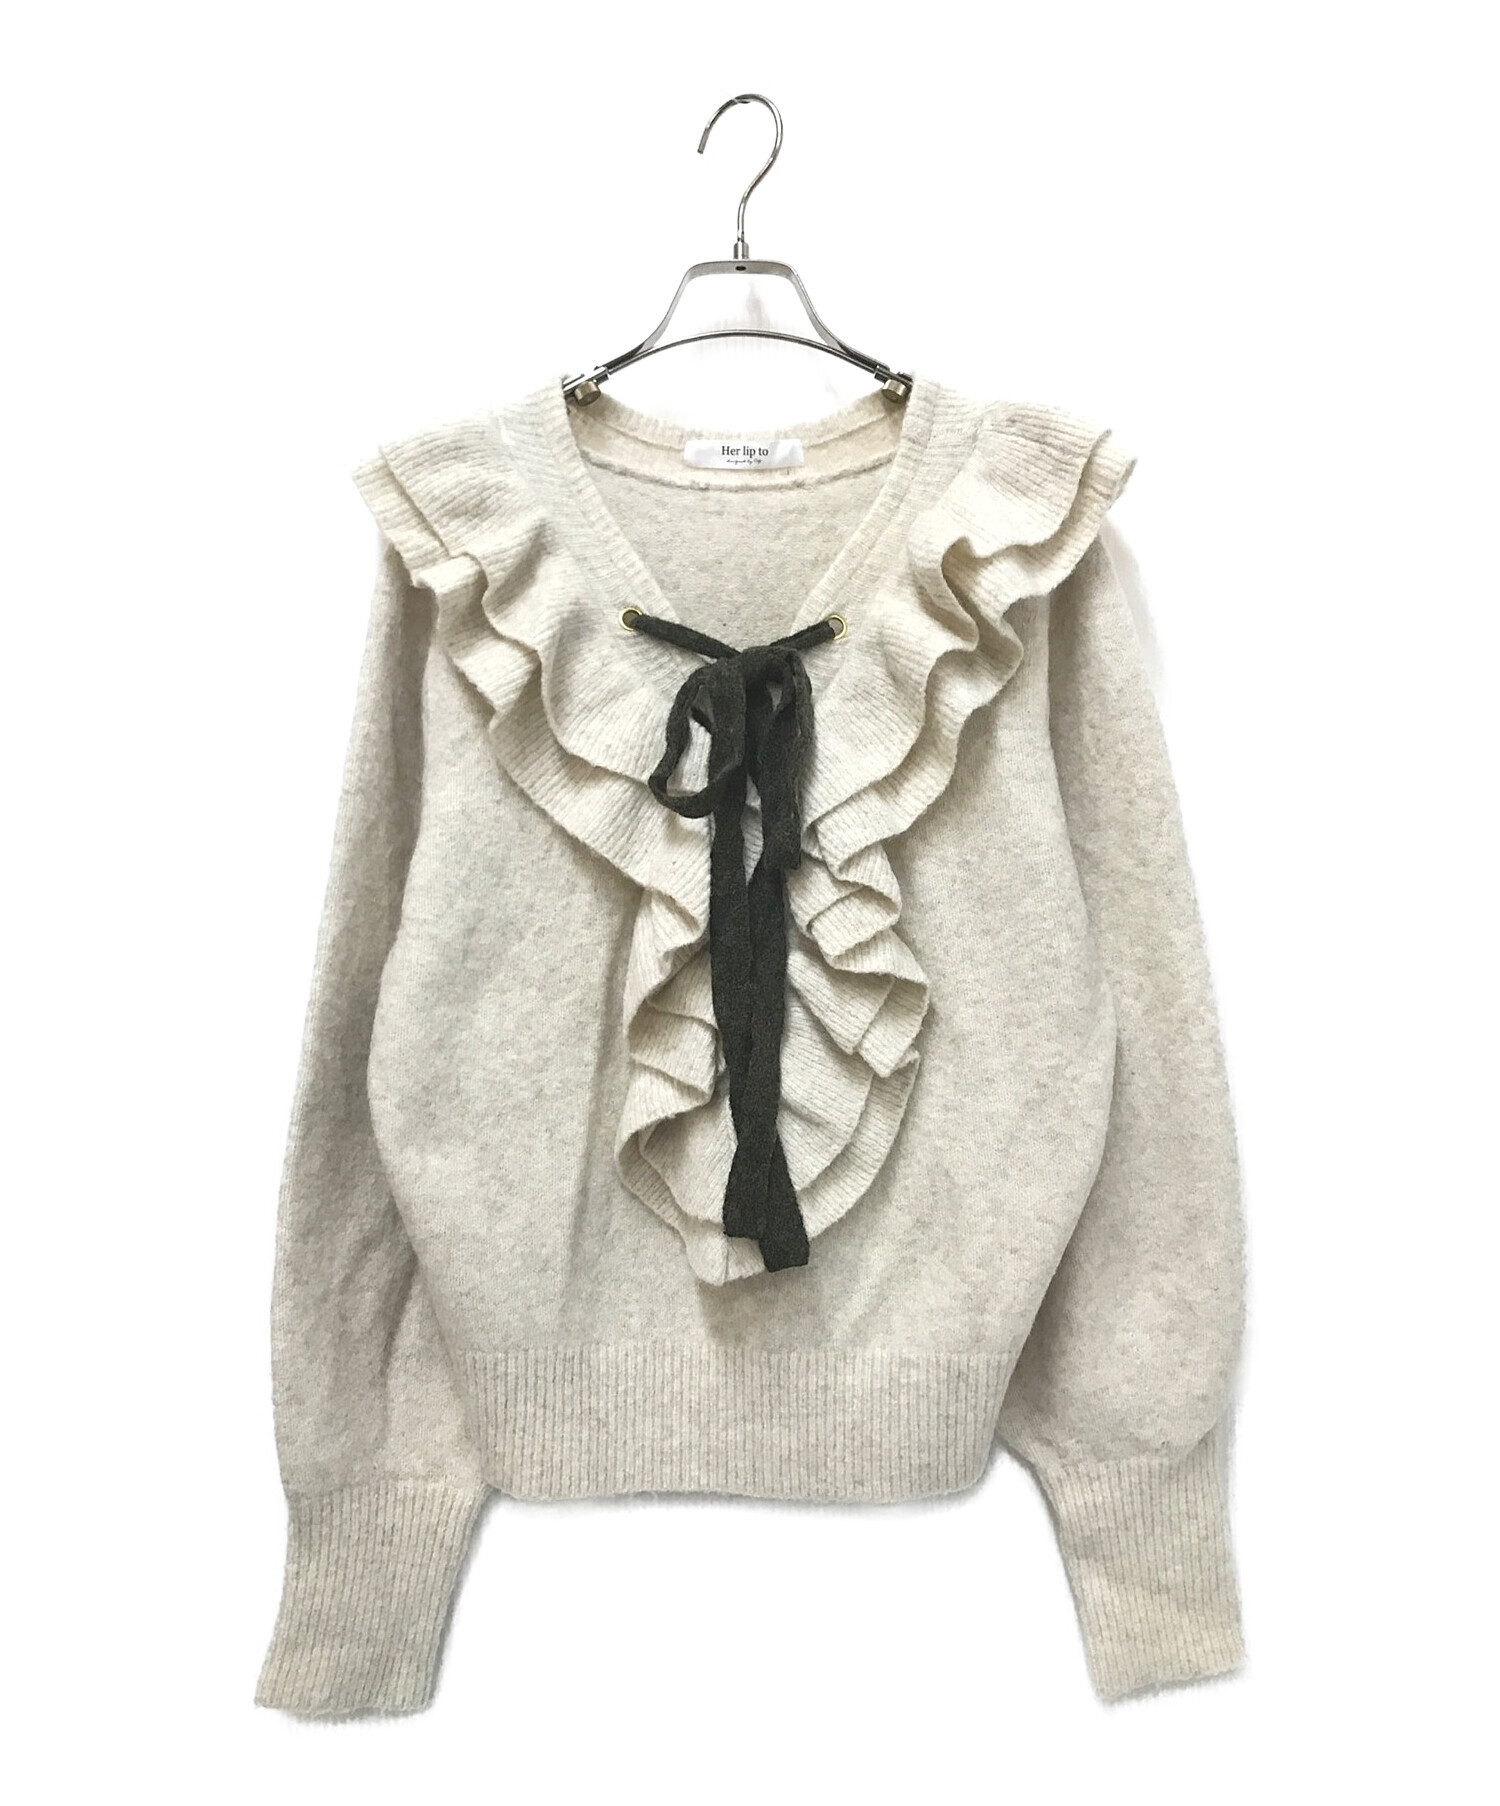 herlipto Lace Up Wool-blend Pullover - ニット